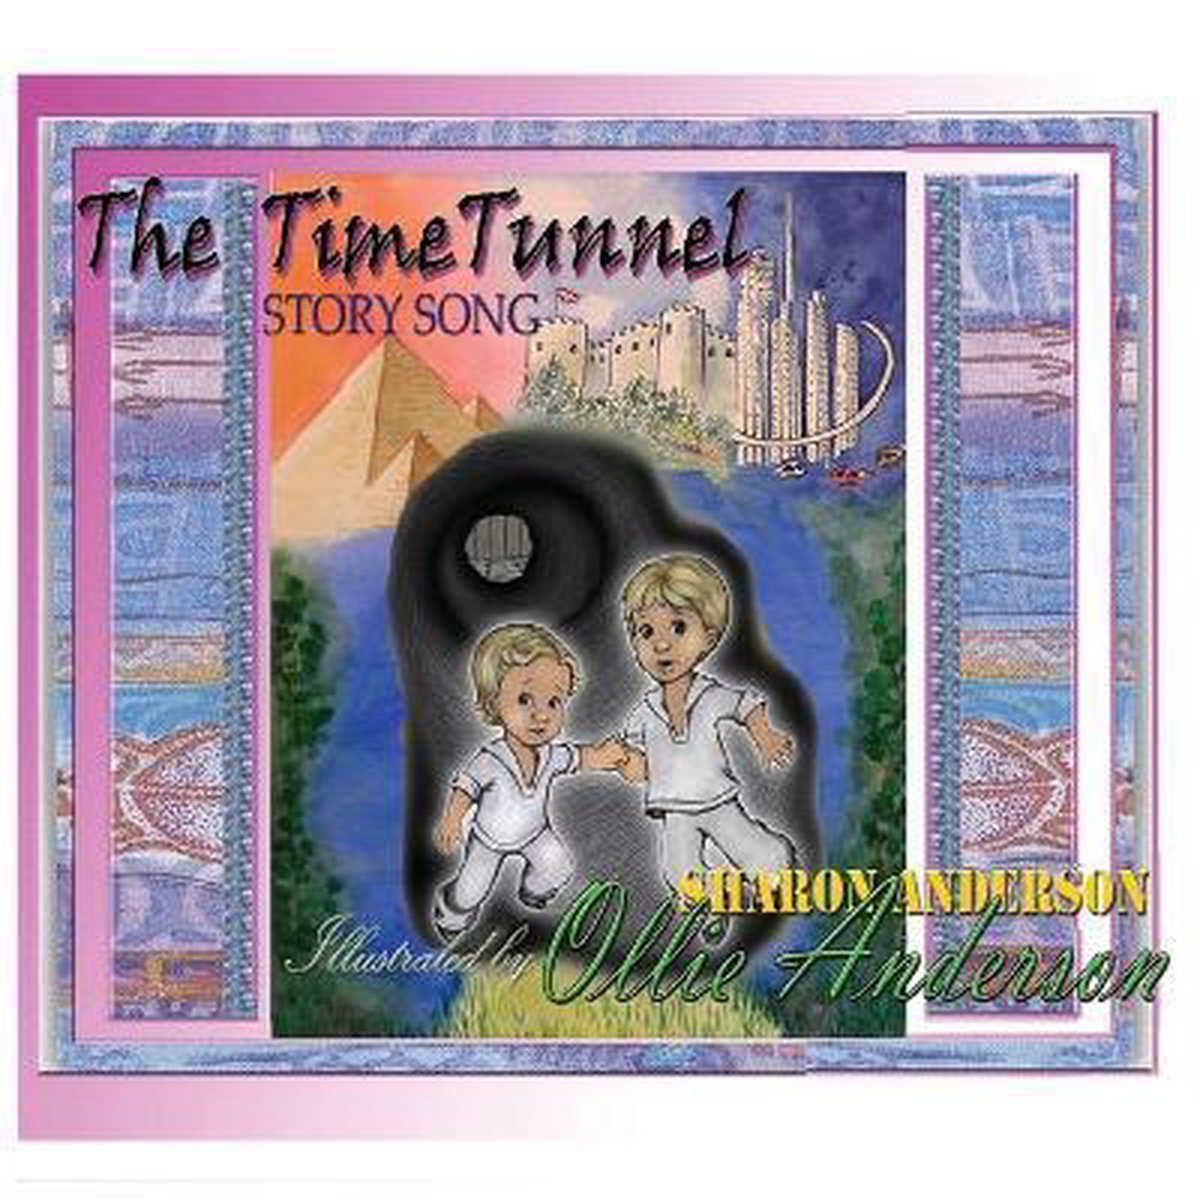 The time tunnel story song